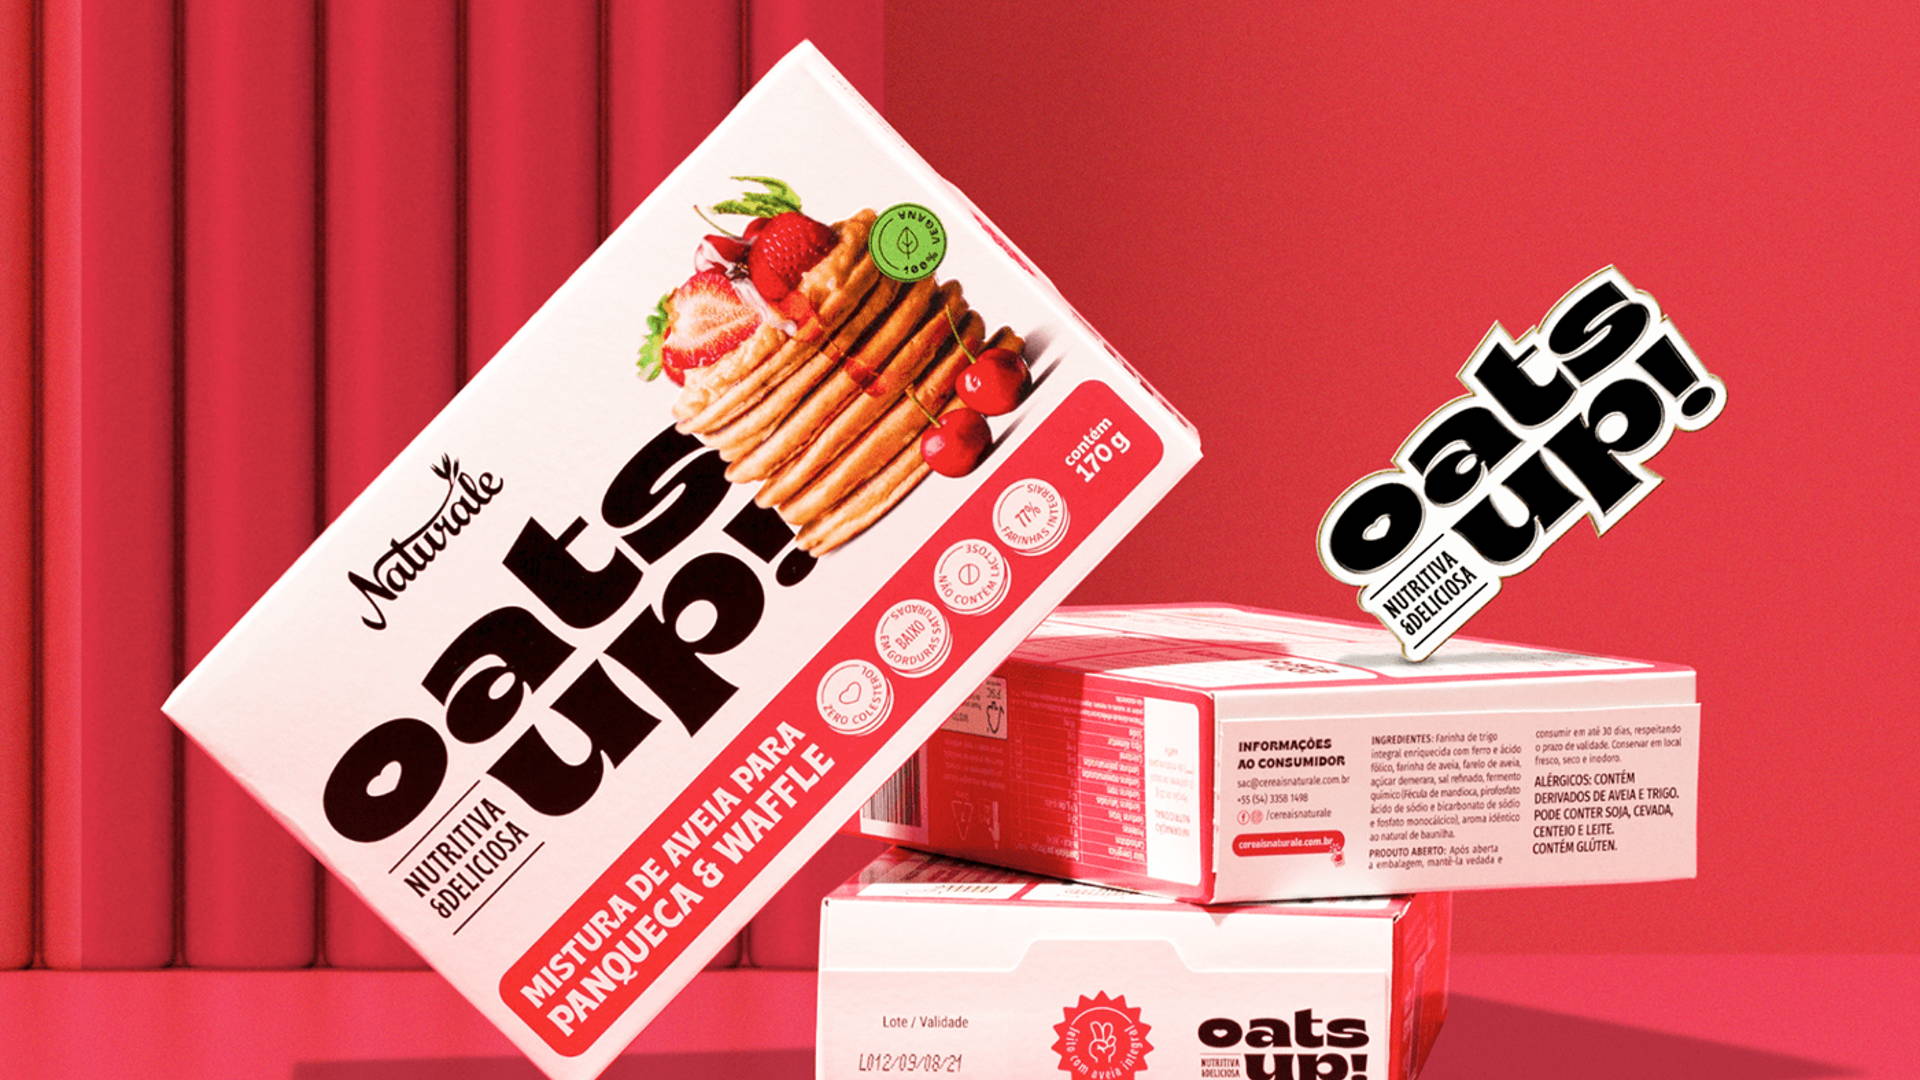 Featured image for Oats Up Seeks Practicality And Healthiness Through Playful Packaging